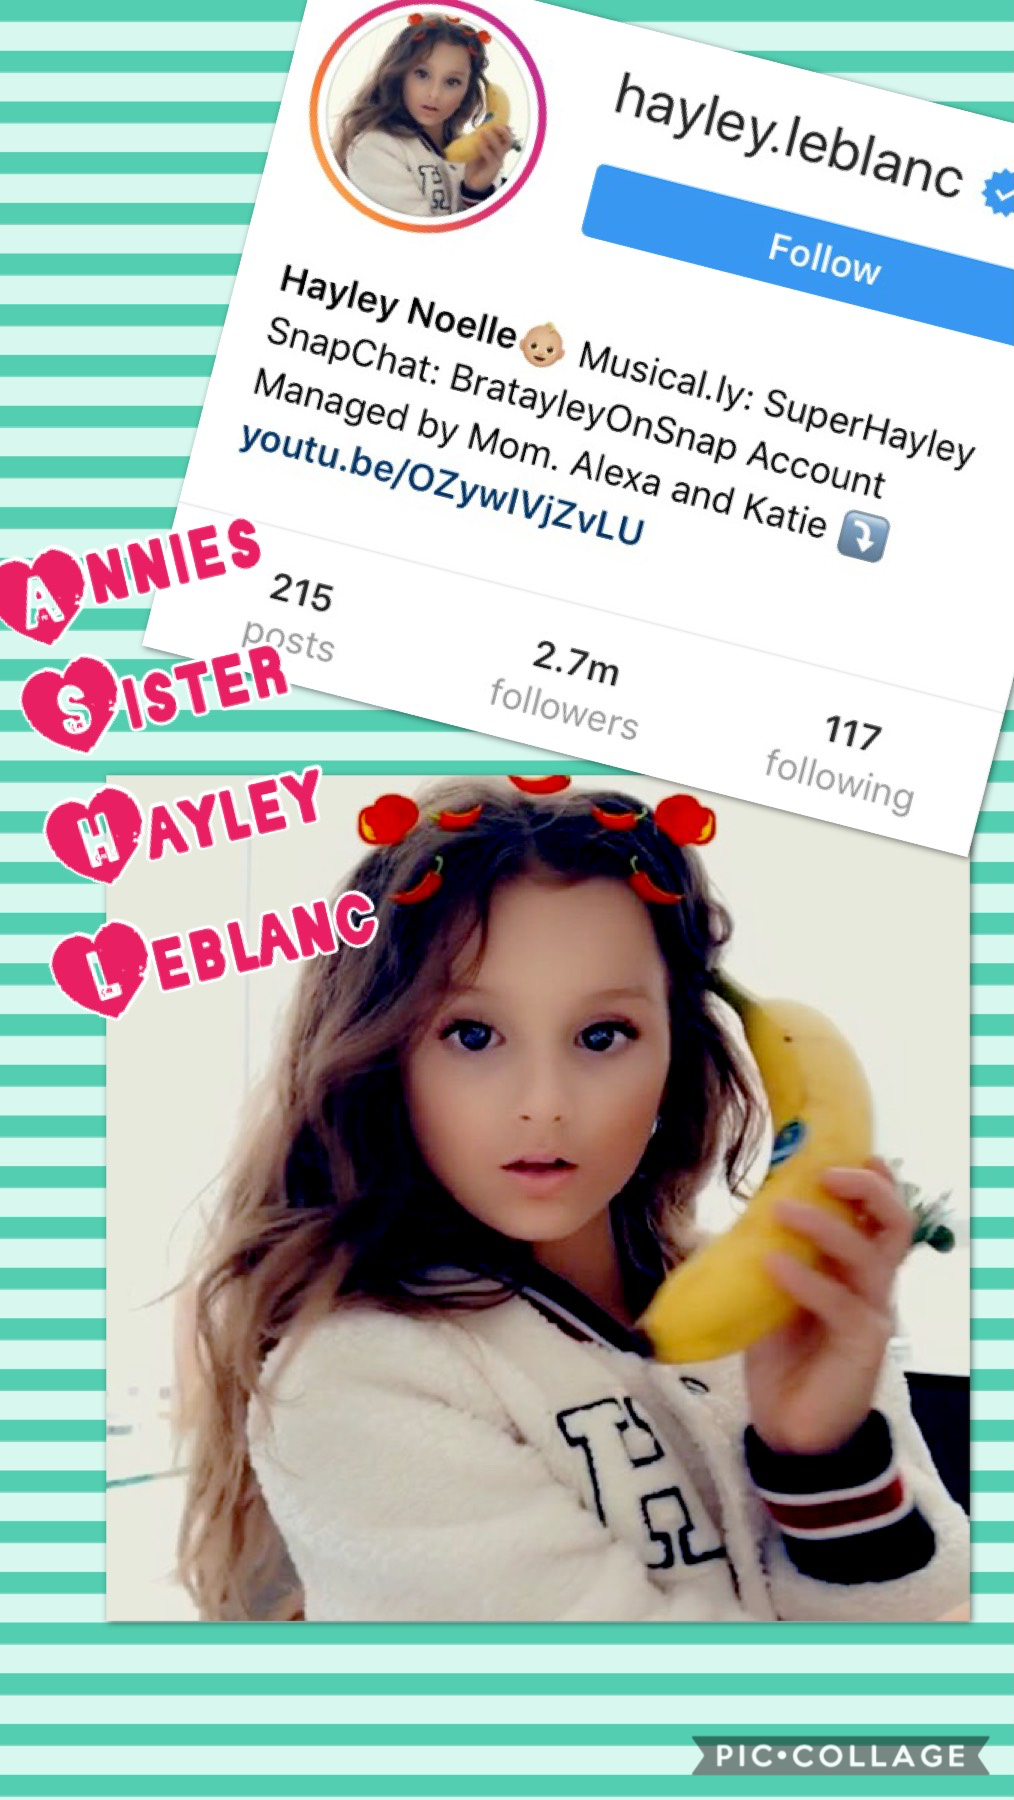 Hayley Leblanc is 9 years old, as of September. Her youtube channel name is Hayley Leblanc. She also has a youtube segment on Brat, as well as a family channel called Bratayley. If you have any questions then comment!! 